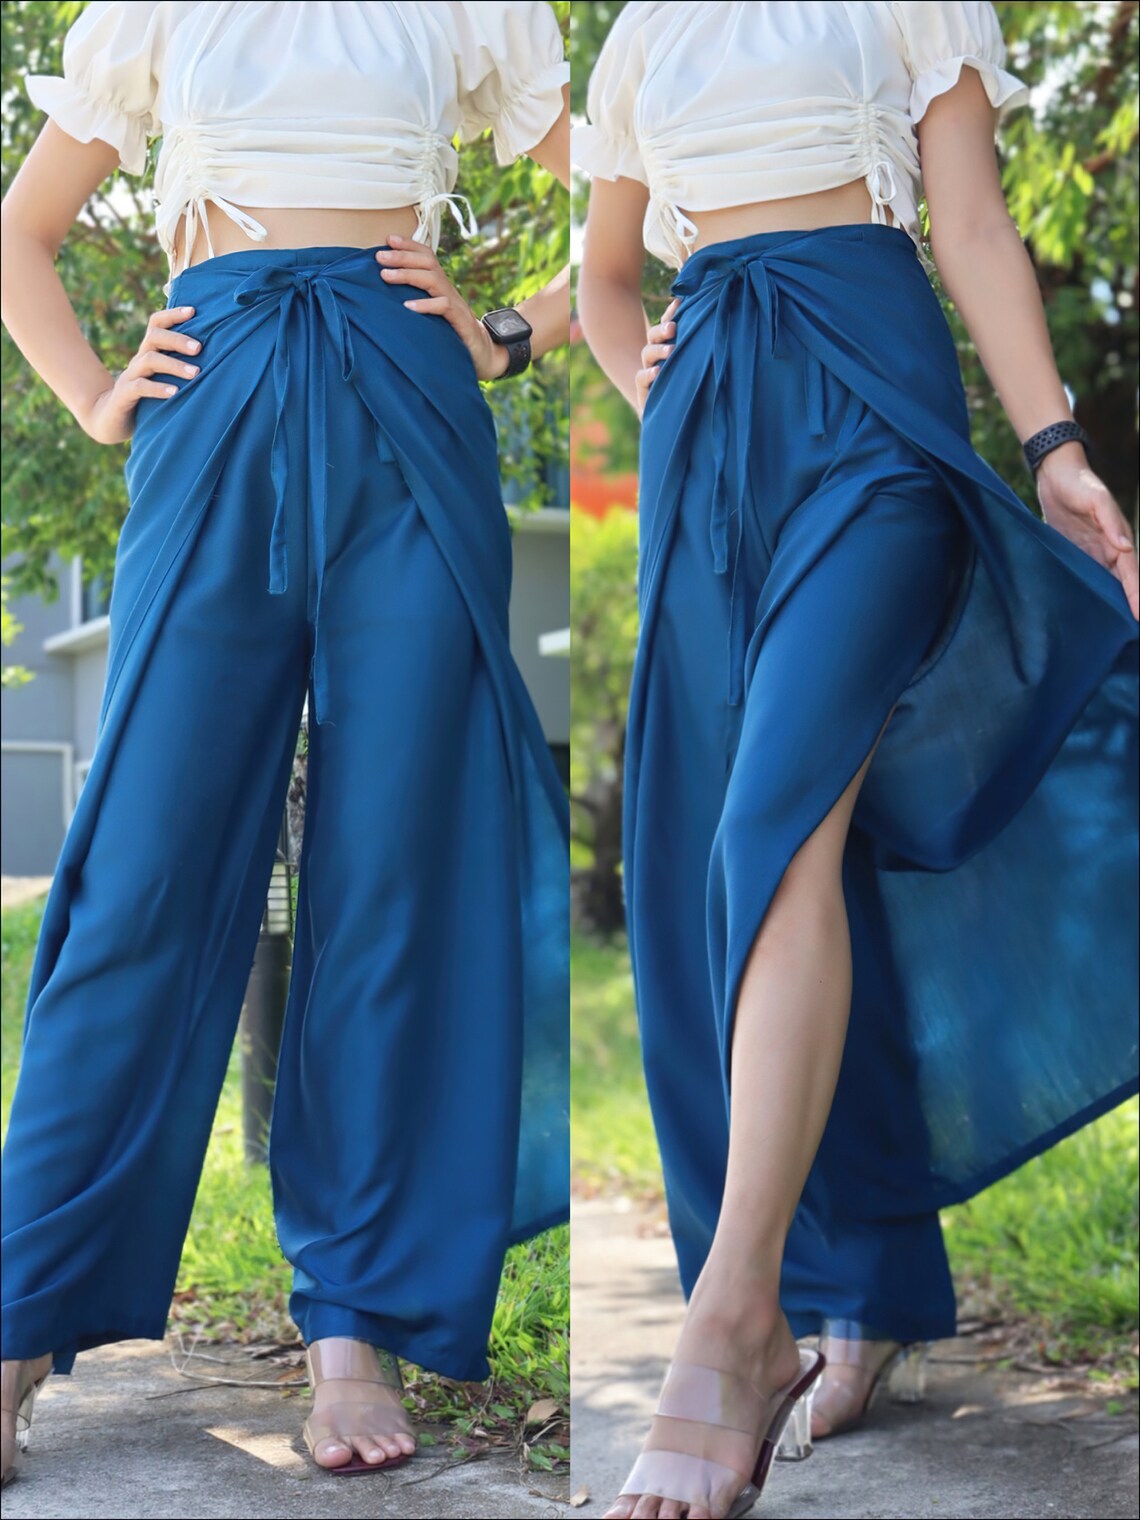 Boho style blue wrap pants with a front tie, paired with a white top, shown from front and side views to highlight the design.